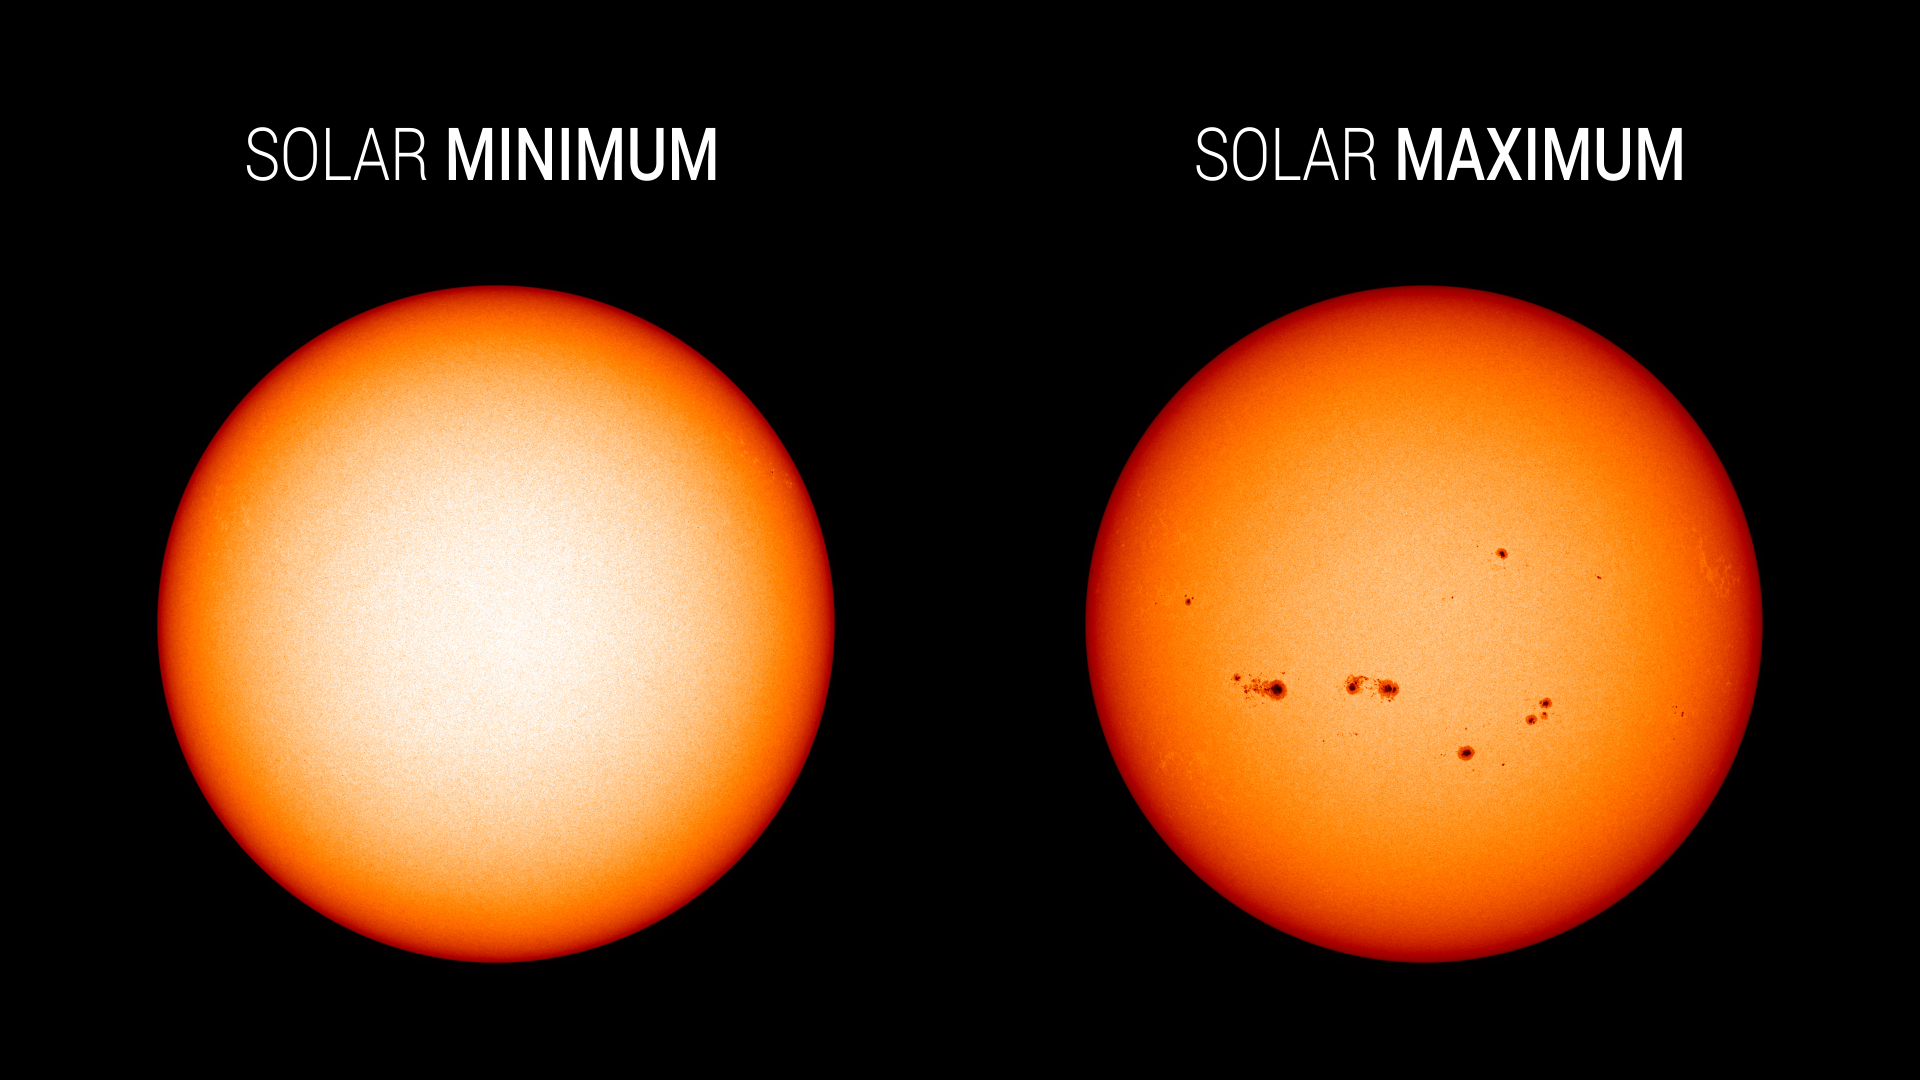 On the left, a bare, orange blub - the Sun. It's labeled solar minimum. On the right, the Sun again, but freckled in dark sunspots. It's labeled Solar Maximum.